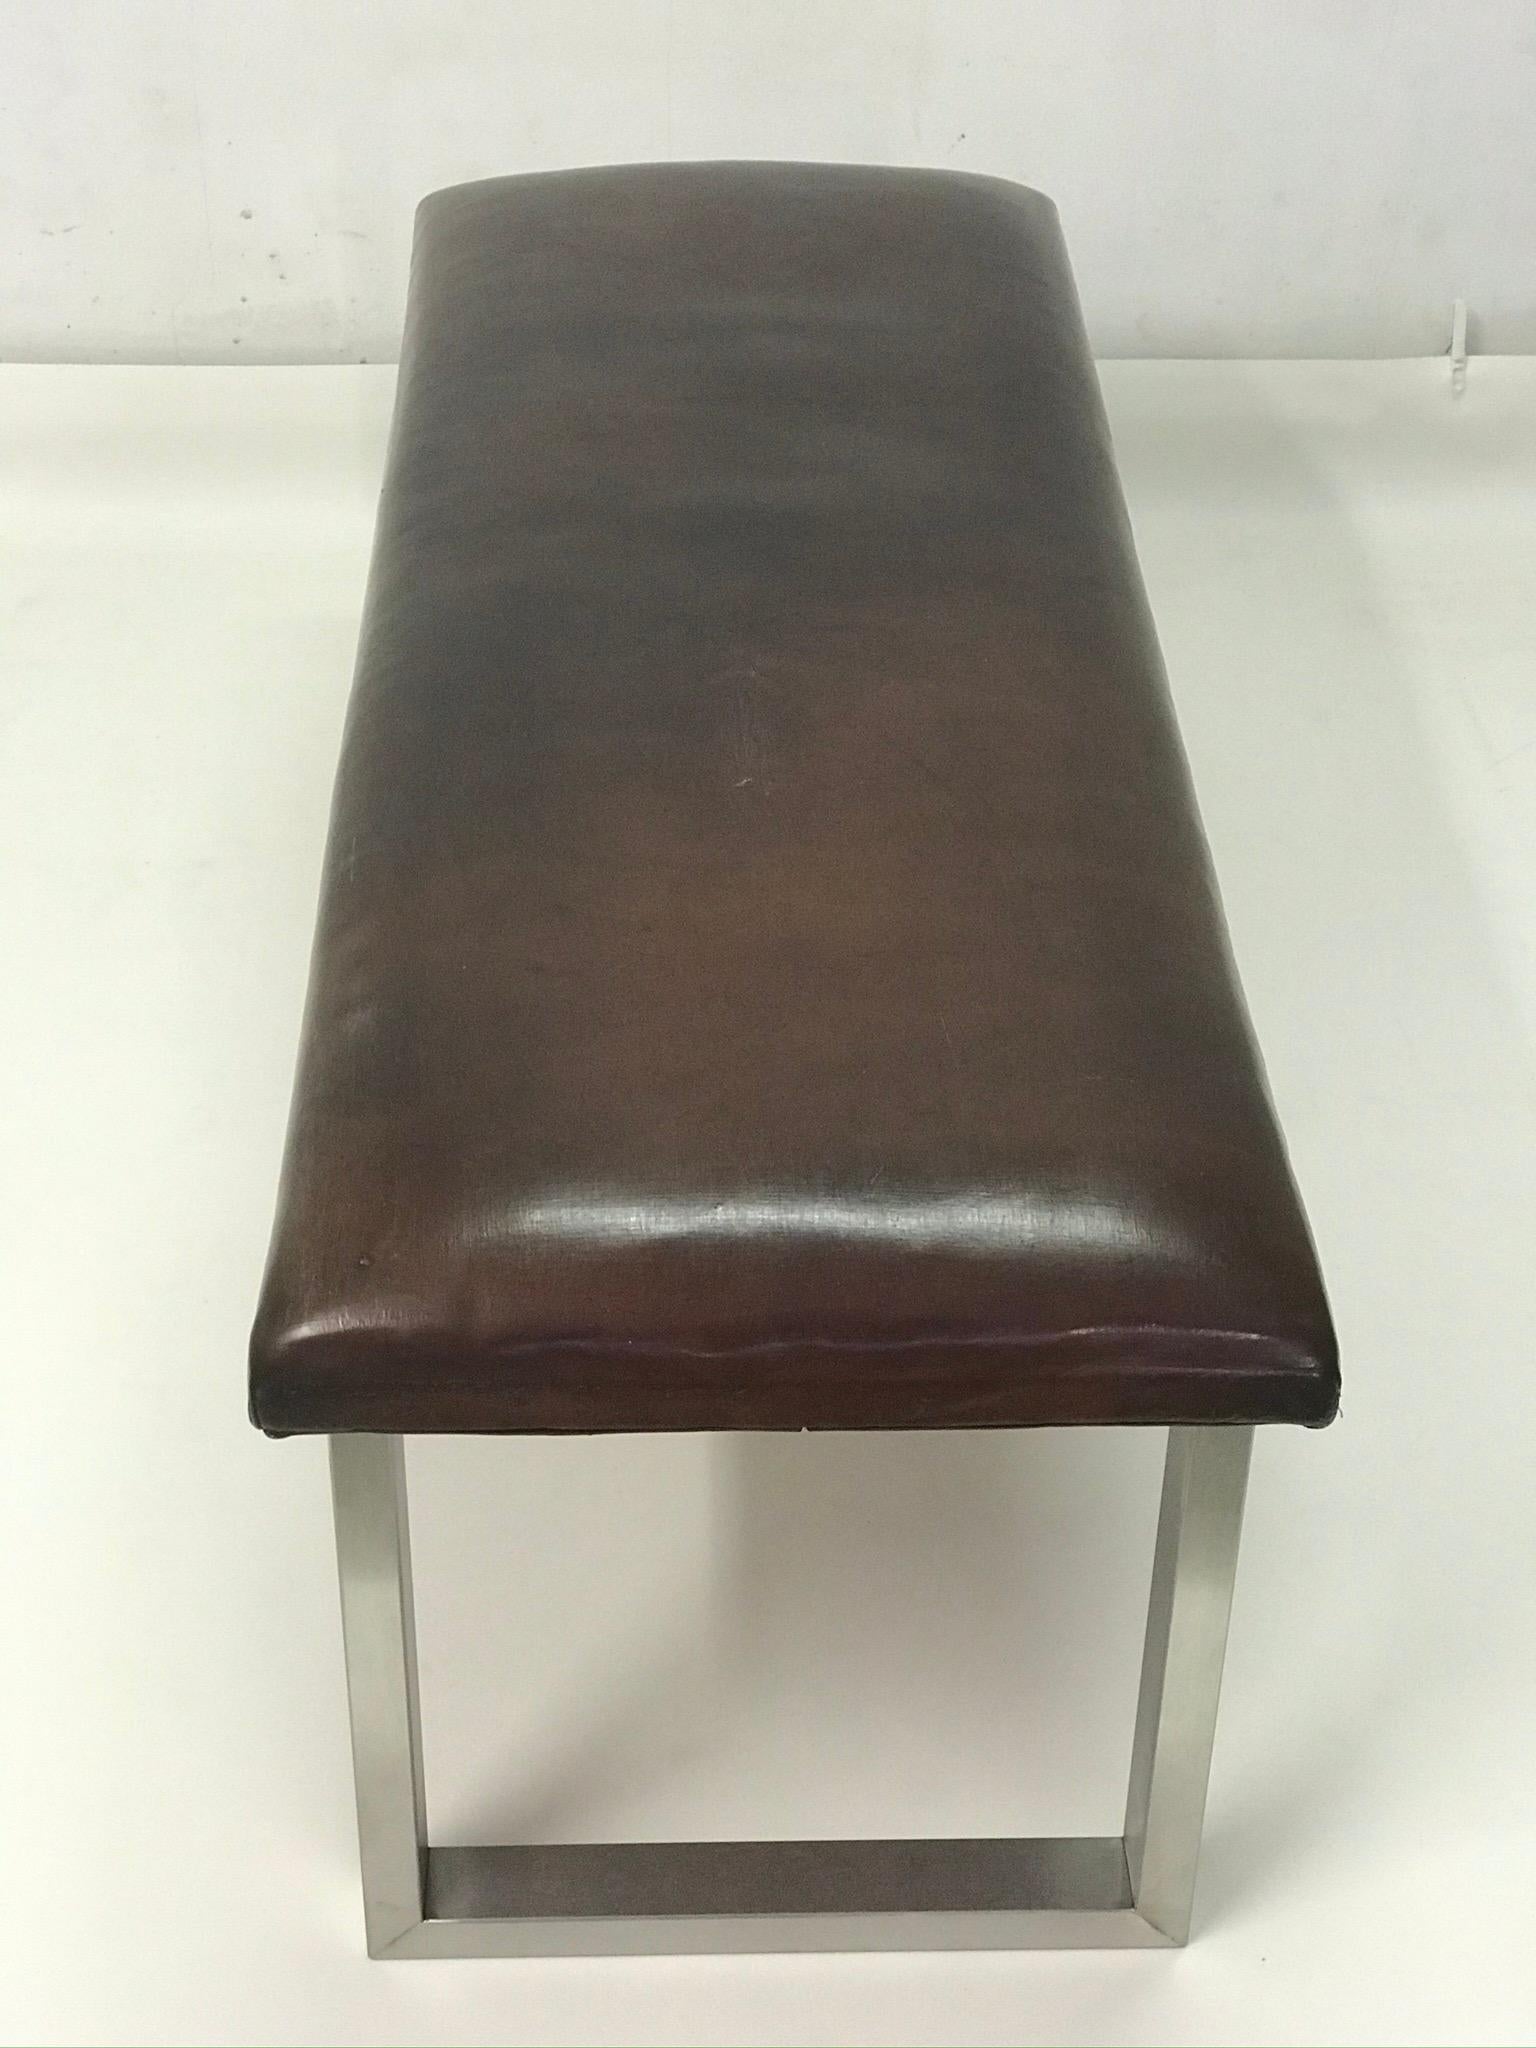 The bench has strong leather completed the stainless steel construction. The leather is in the original patina.